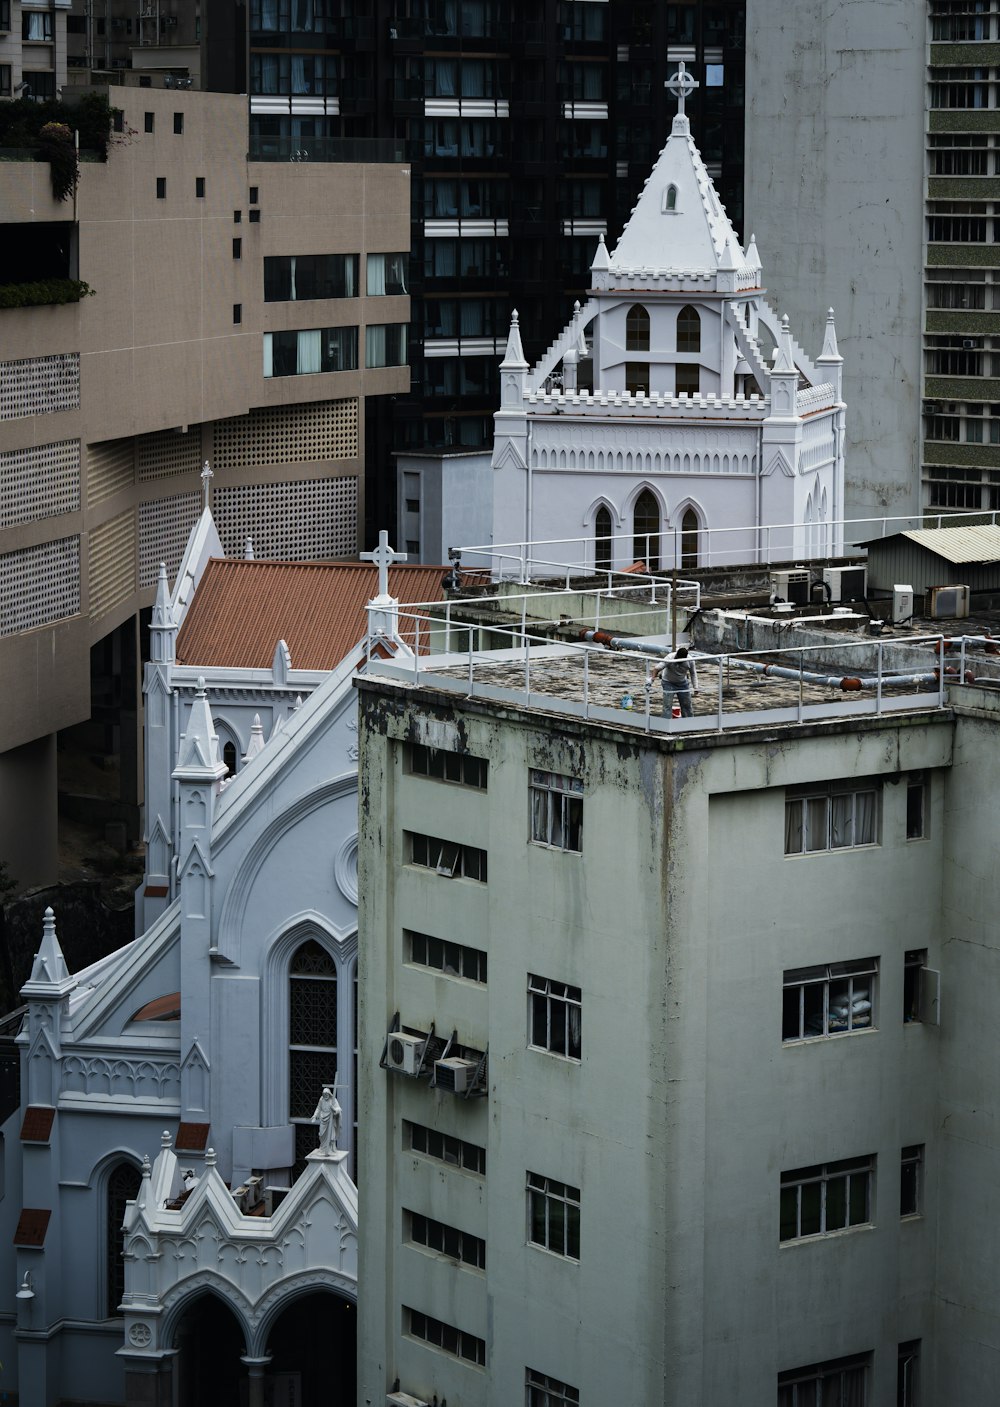 a white building with a steeple in the middle of a city